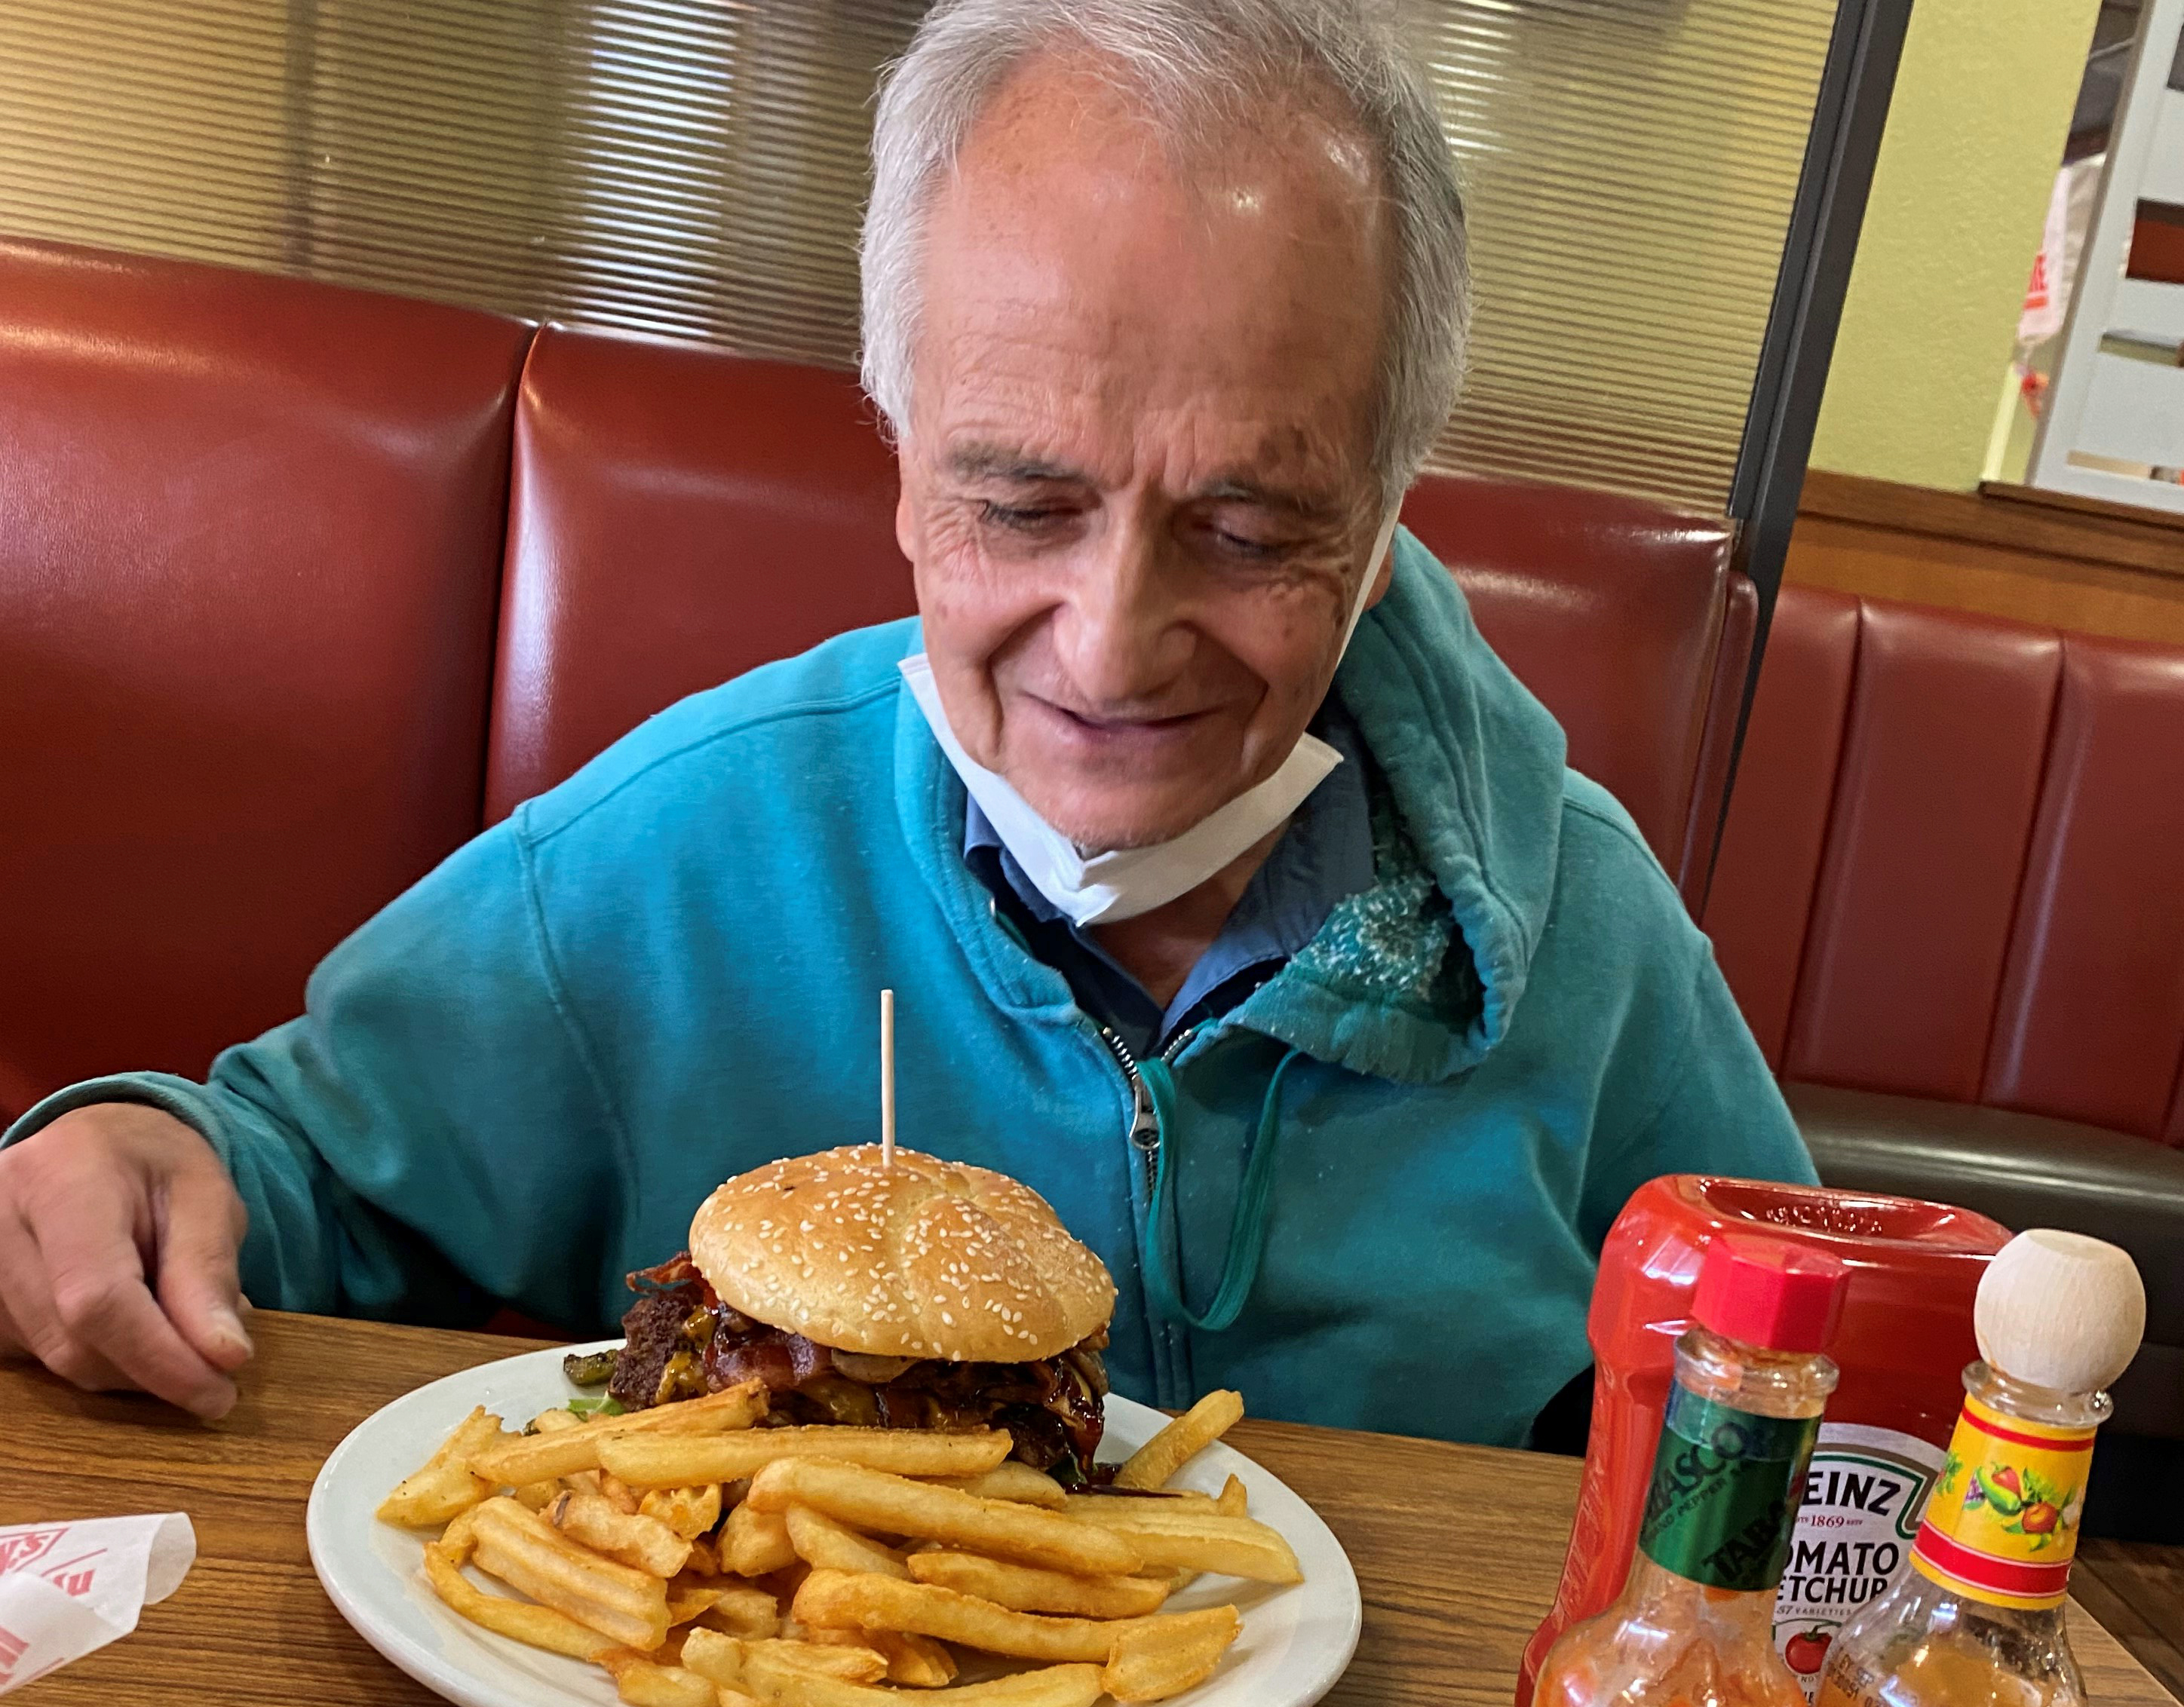 Former Substitute Teacher Mr. V Treated To Lunch